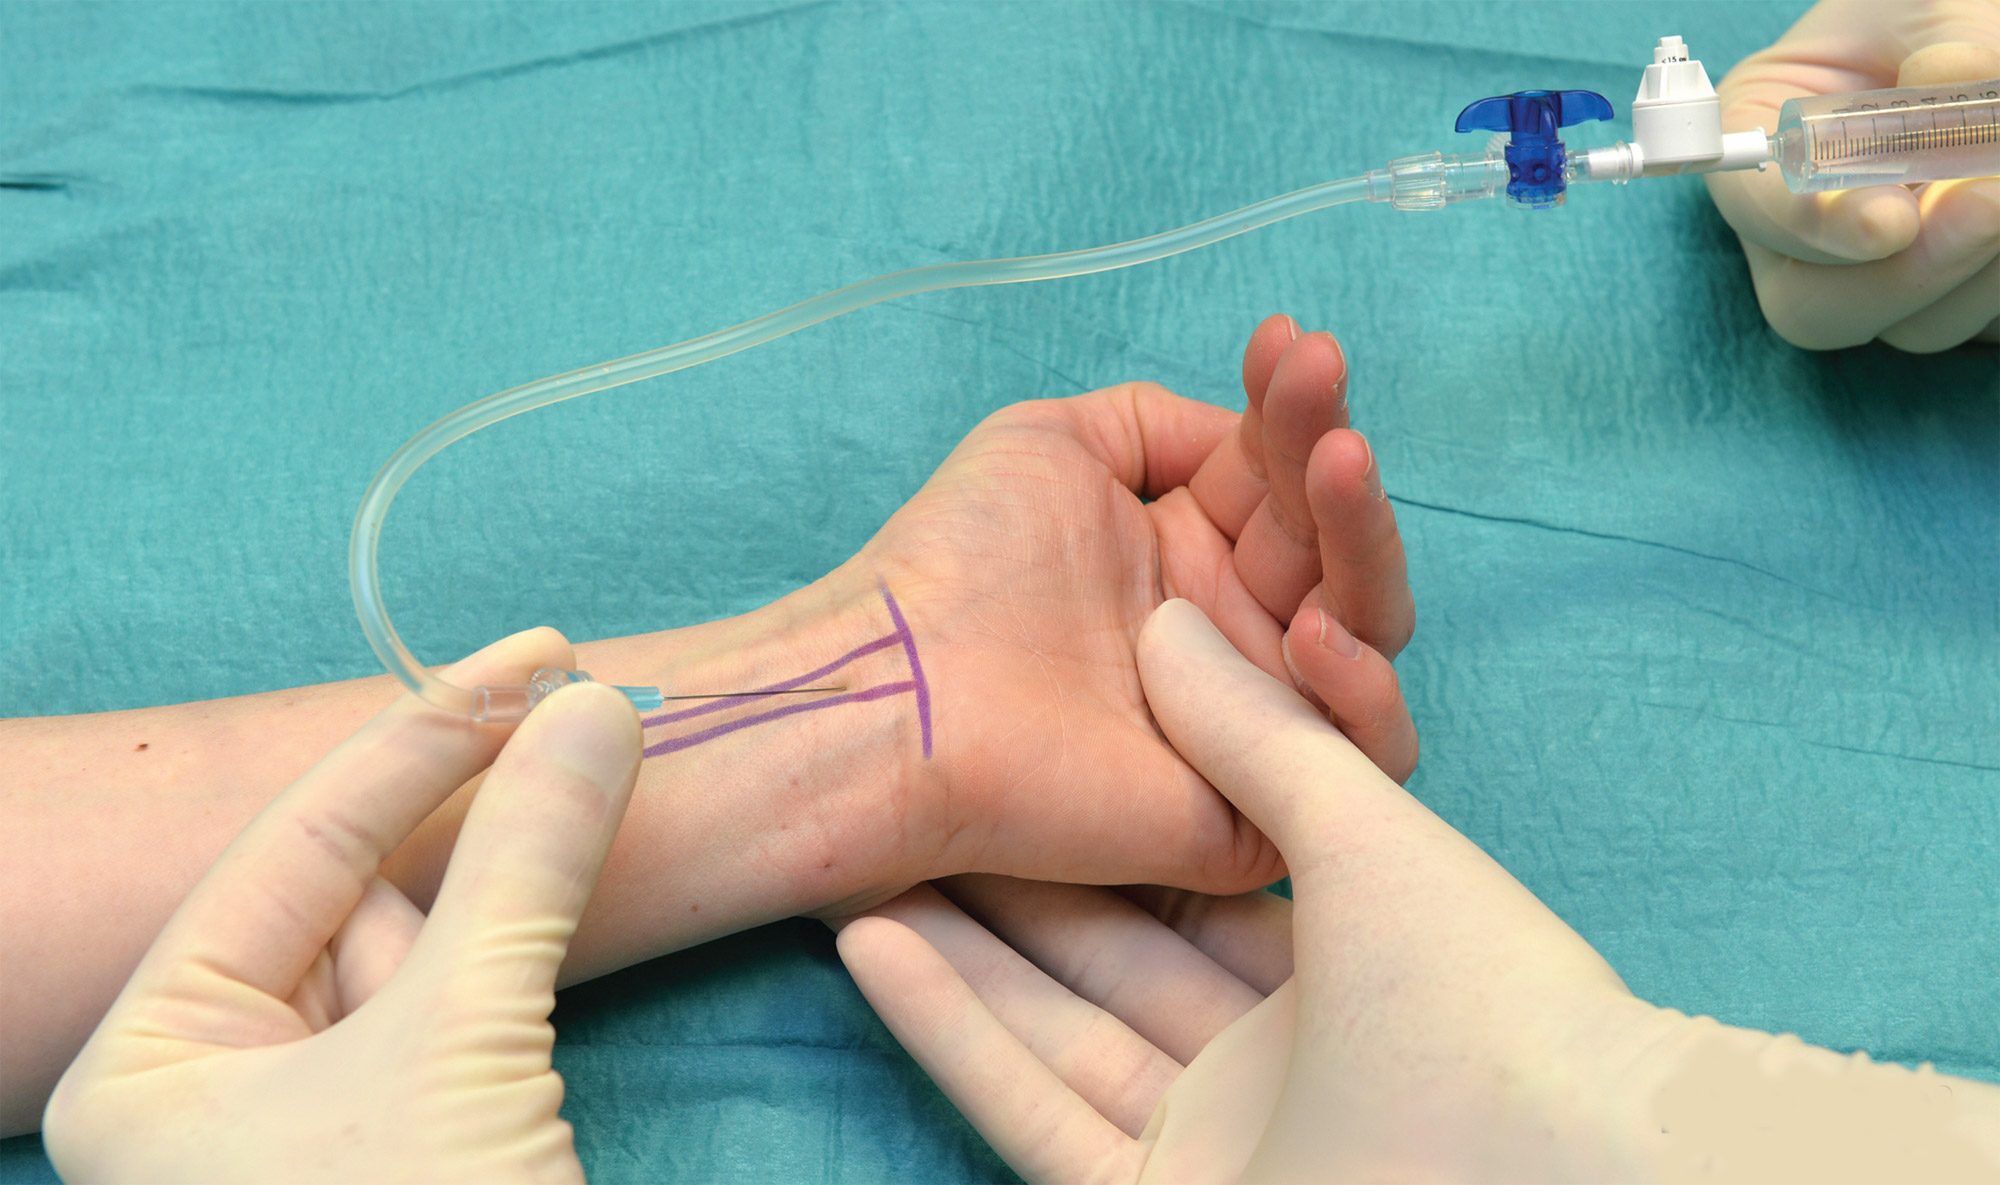 Hand and Wrist Surgery in Iran